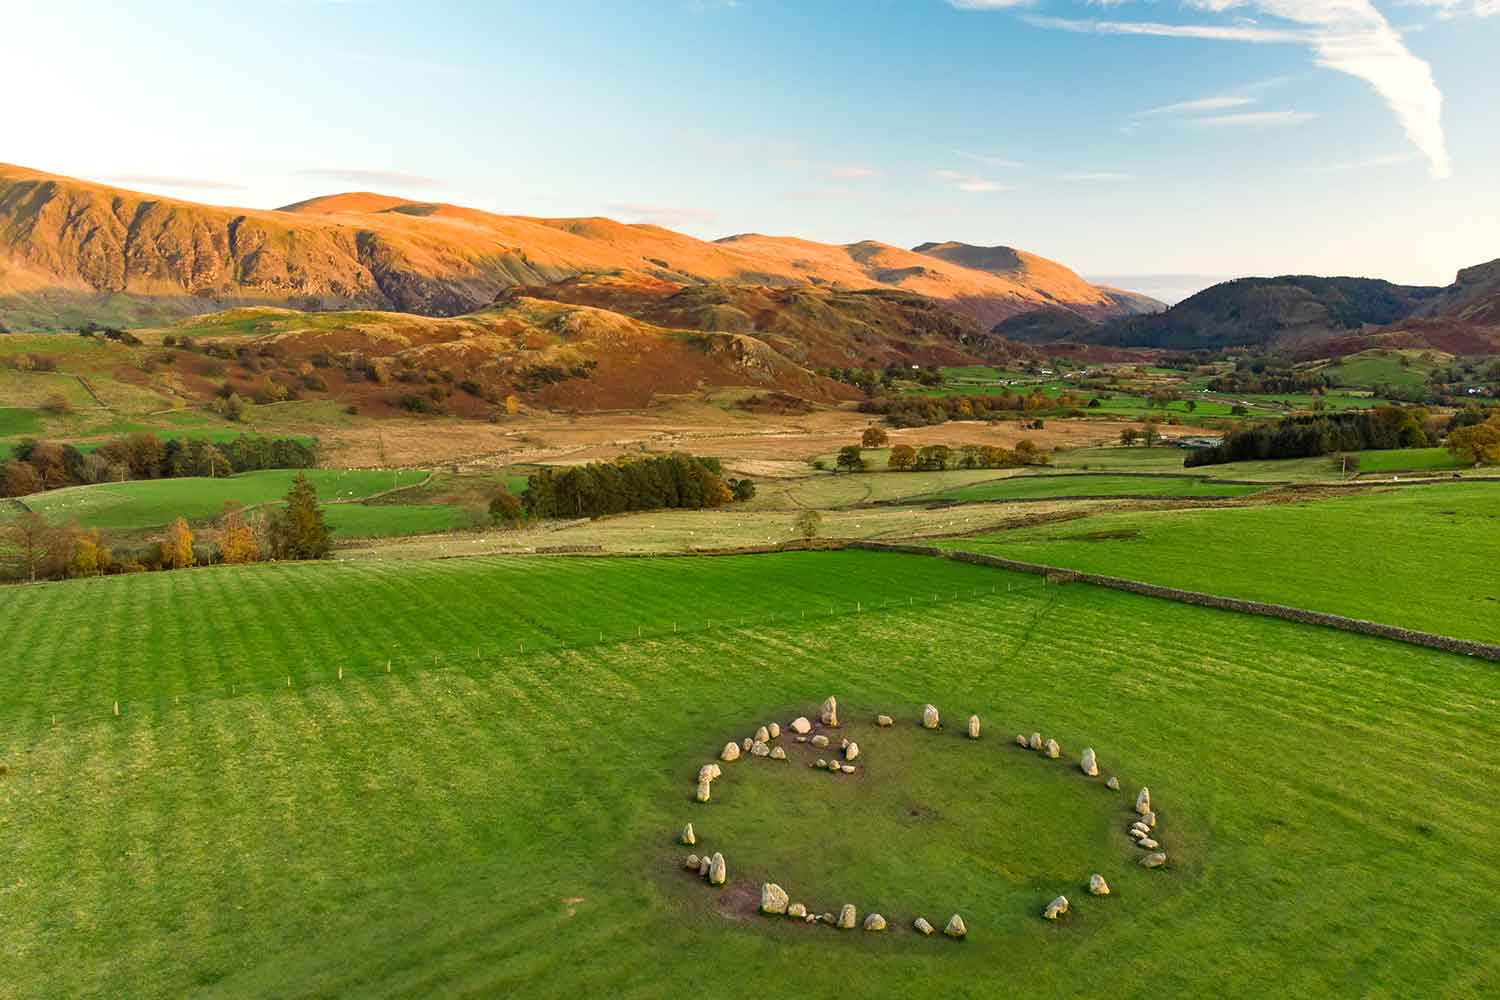 Aerial view of the stone circle in a field